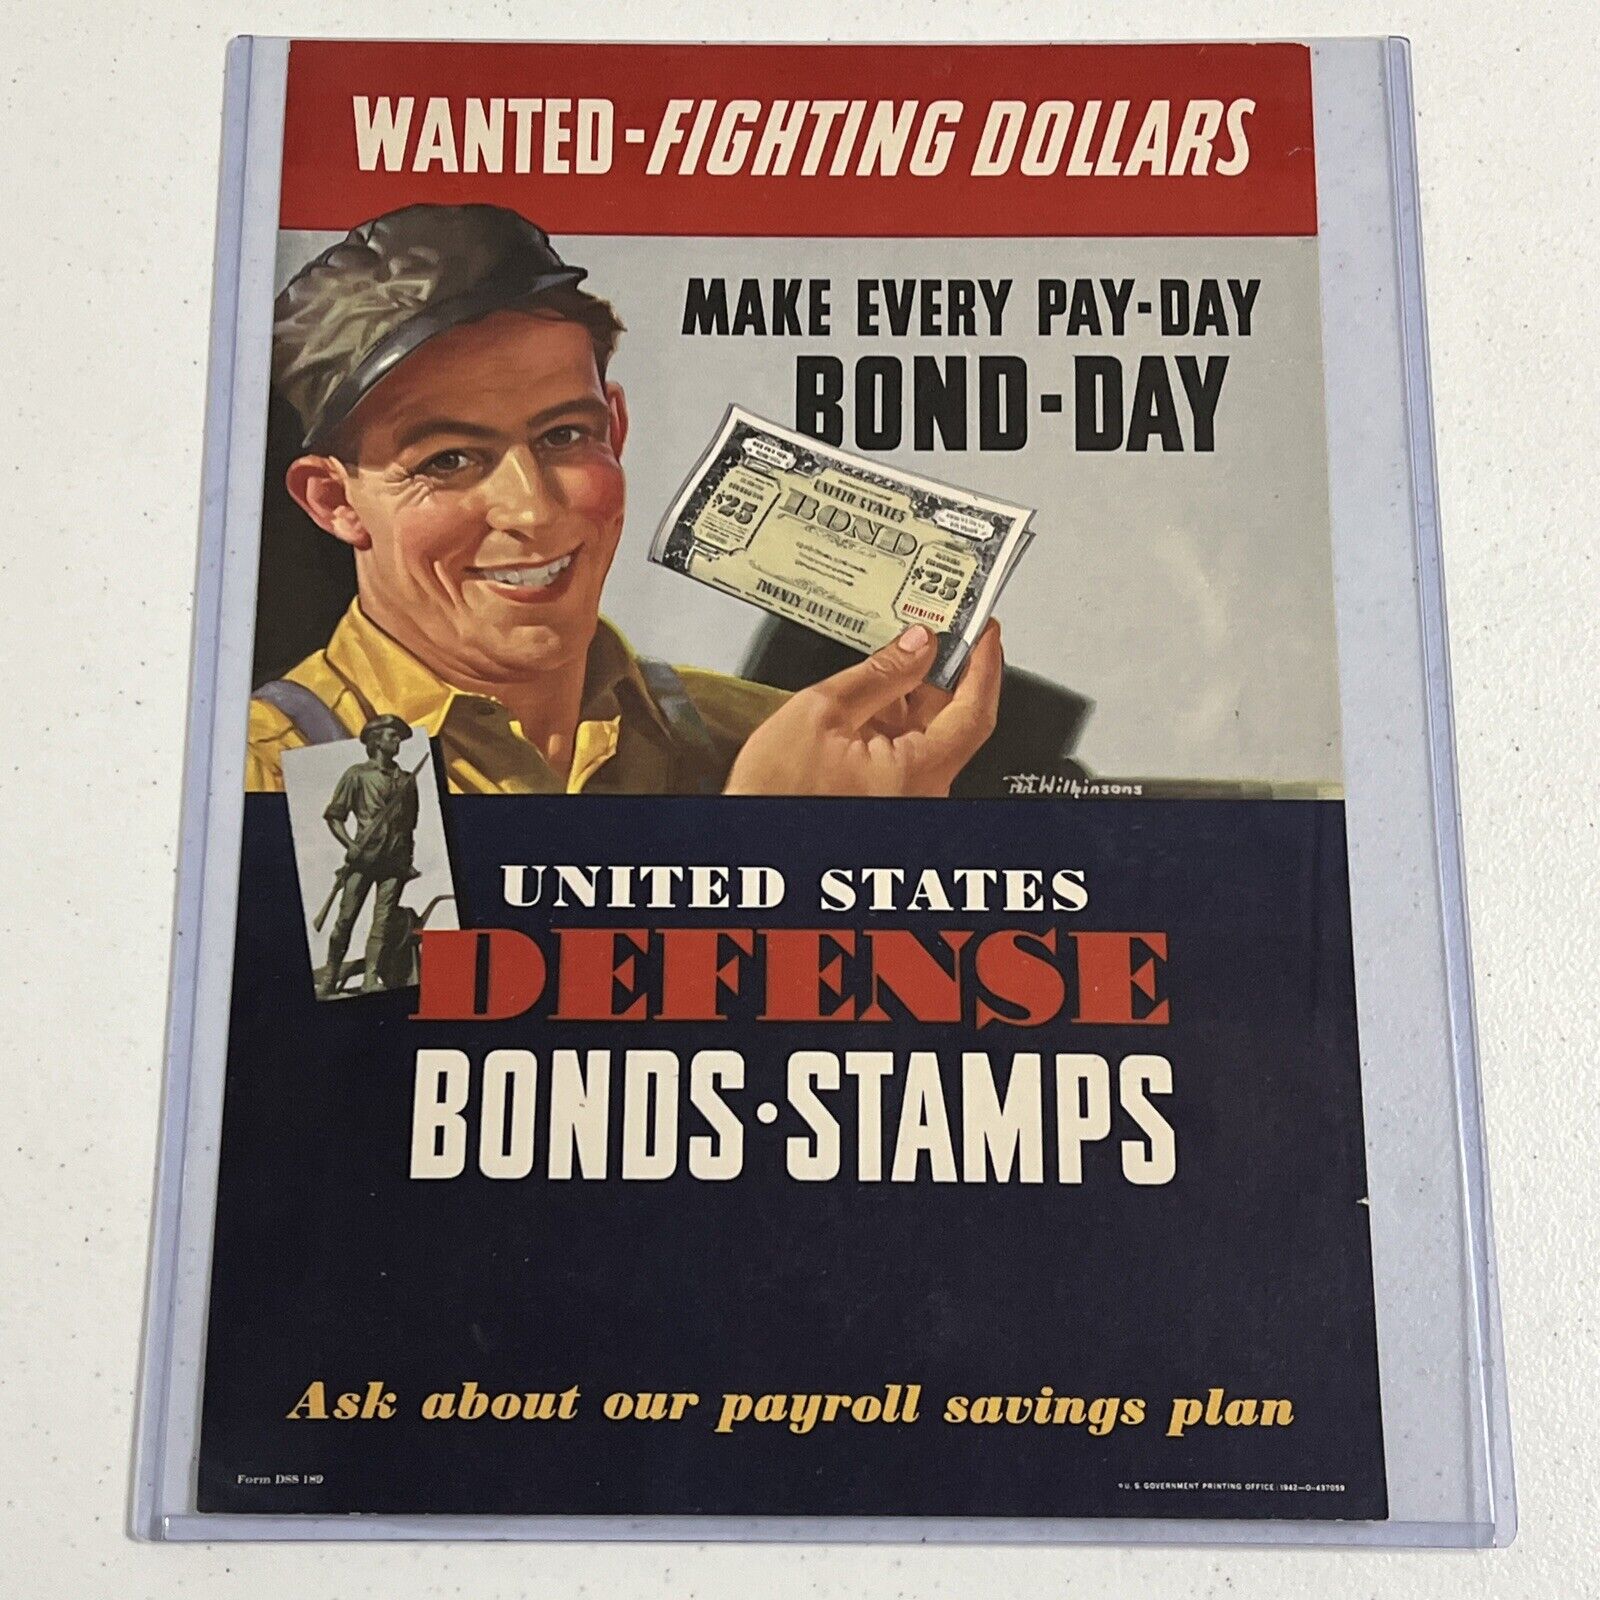 Authentic 1942 WWII Poster Wanted Fighting Dollars Defense Bonds Stamps 10x14